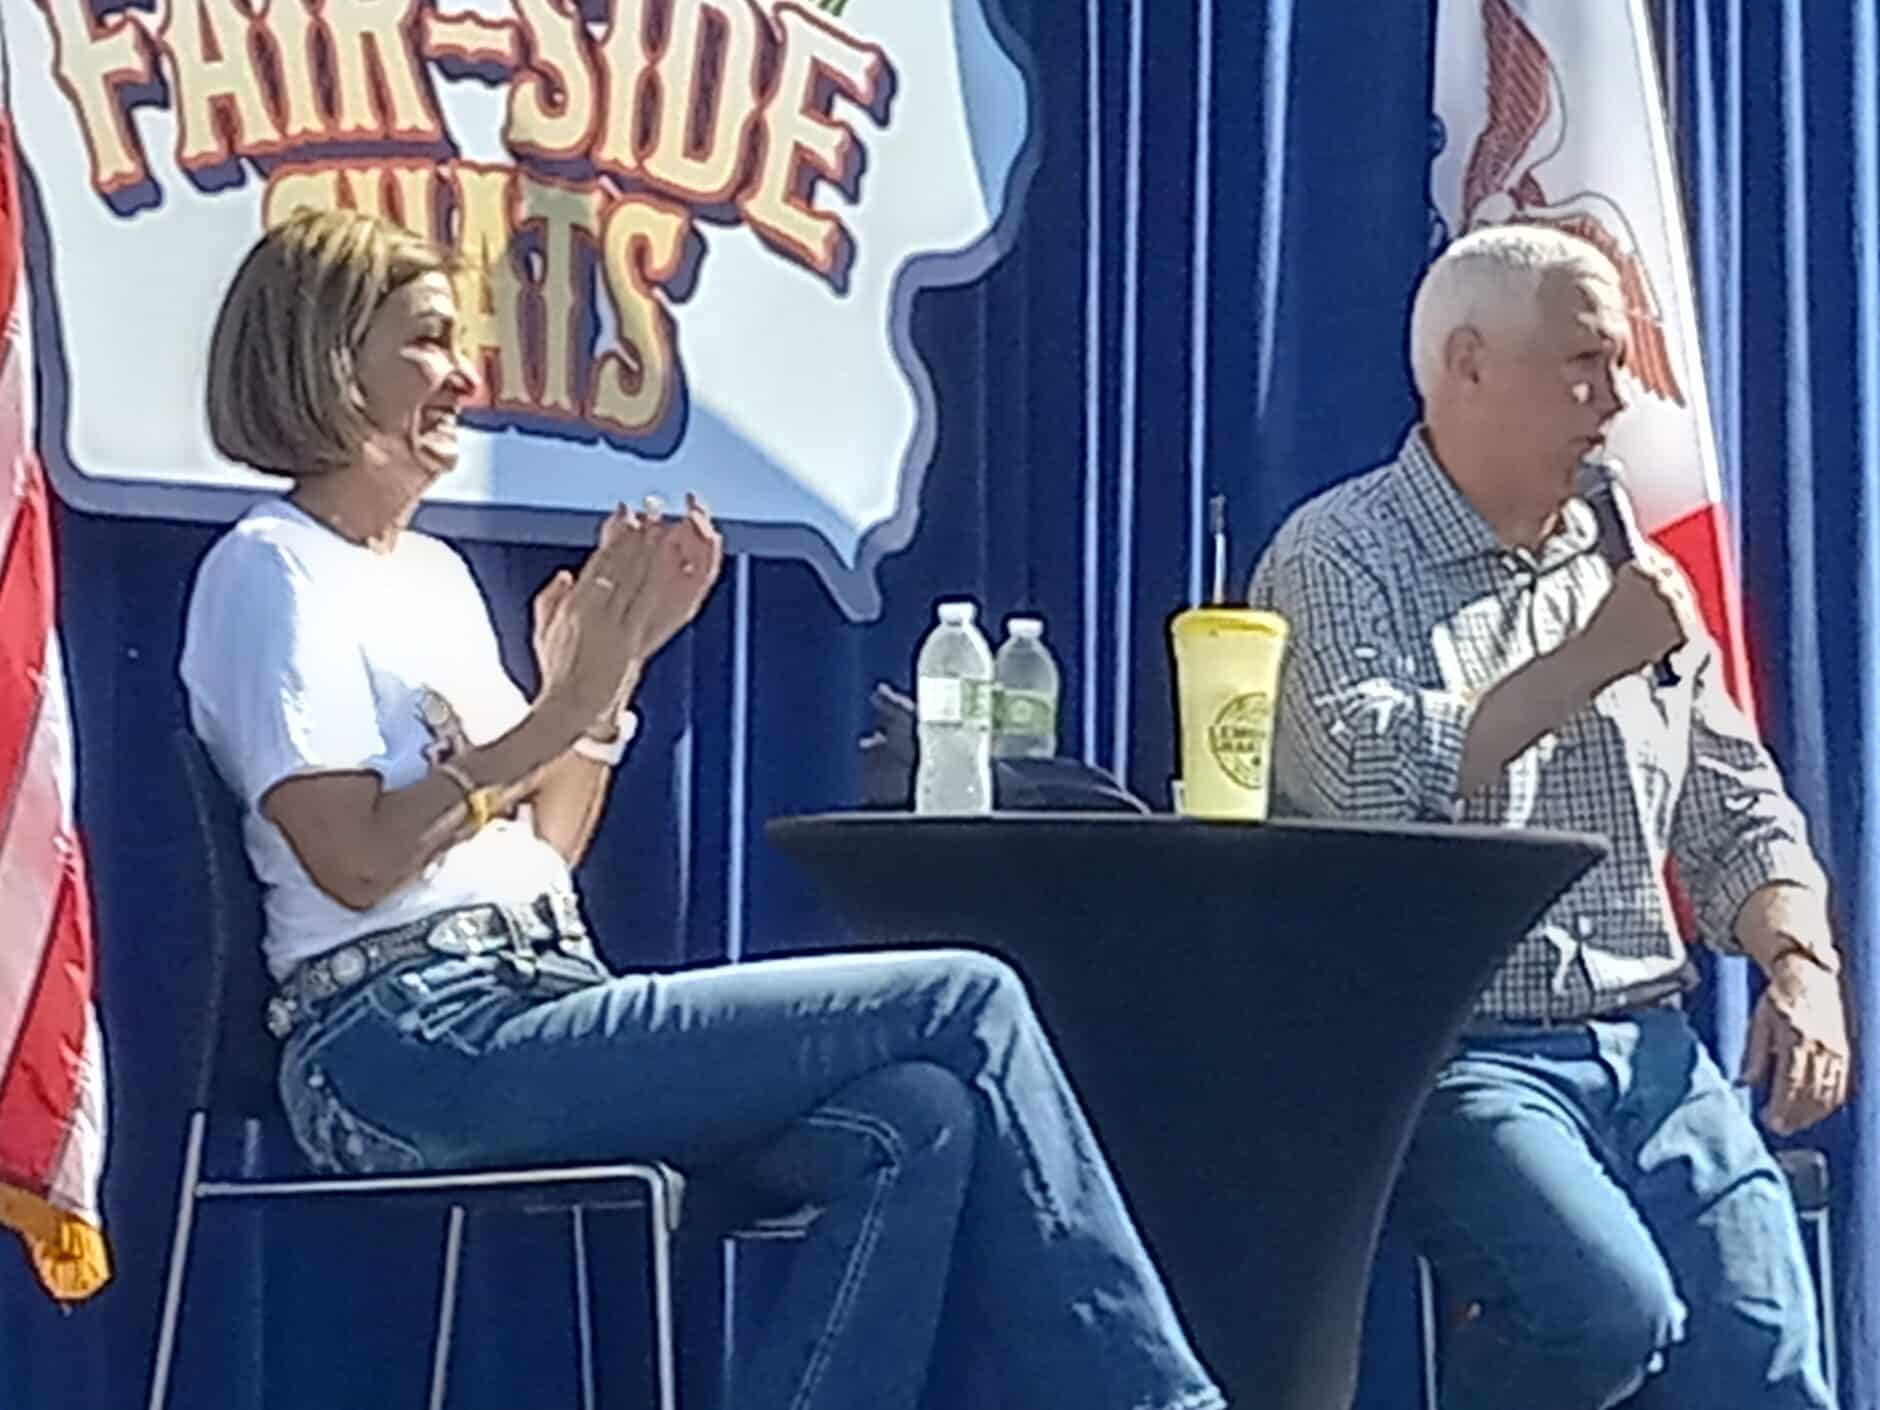 Pence knocks Biden administration in Iowa State Fair campaign visit